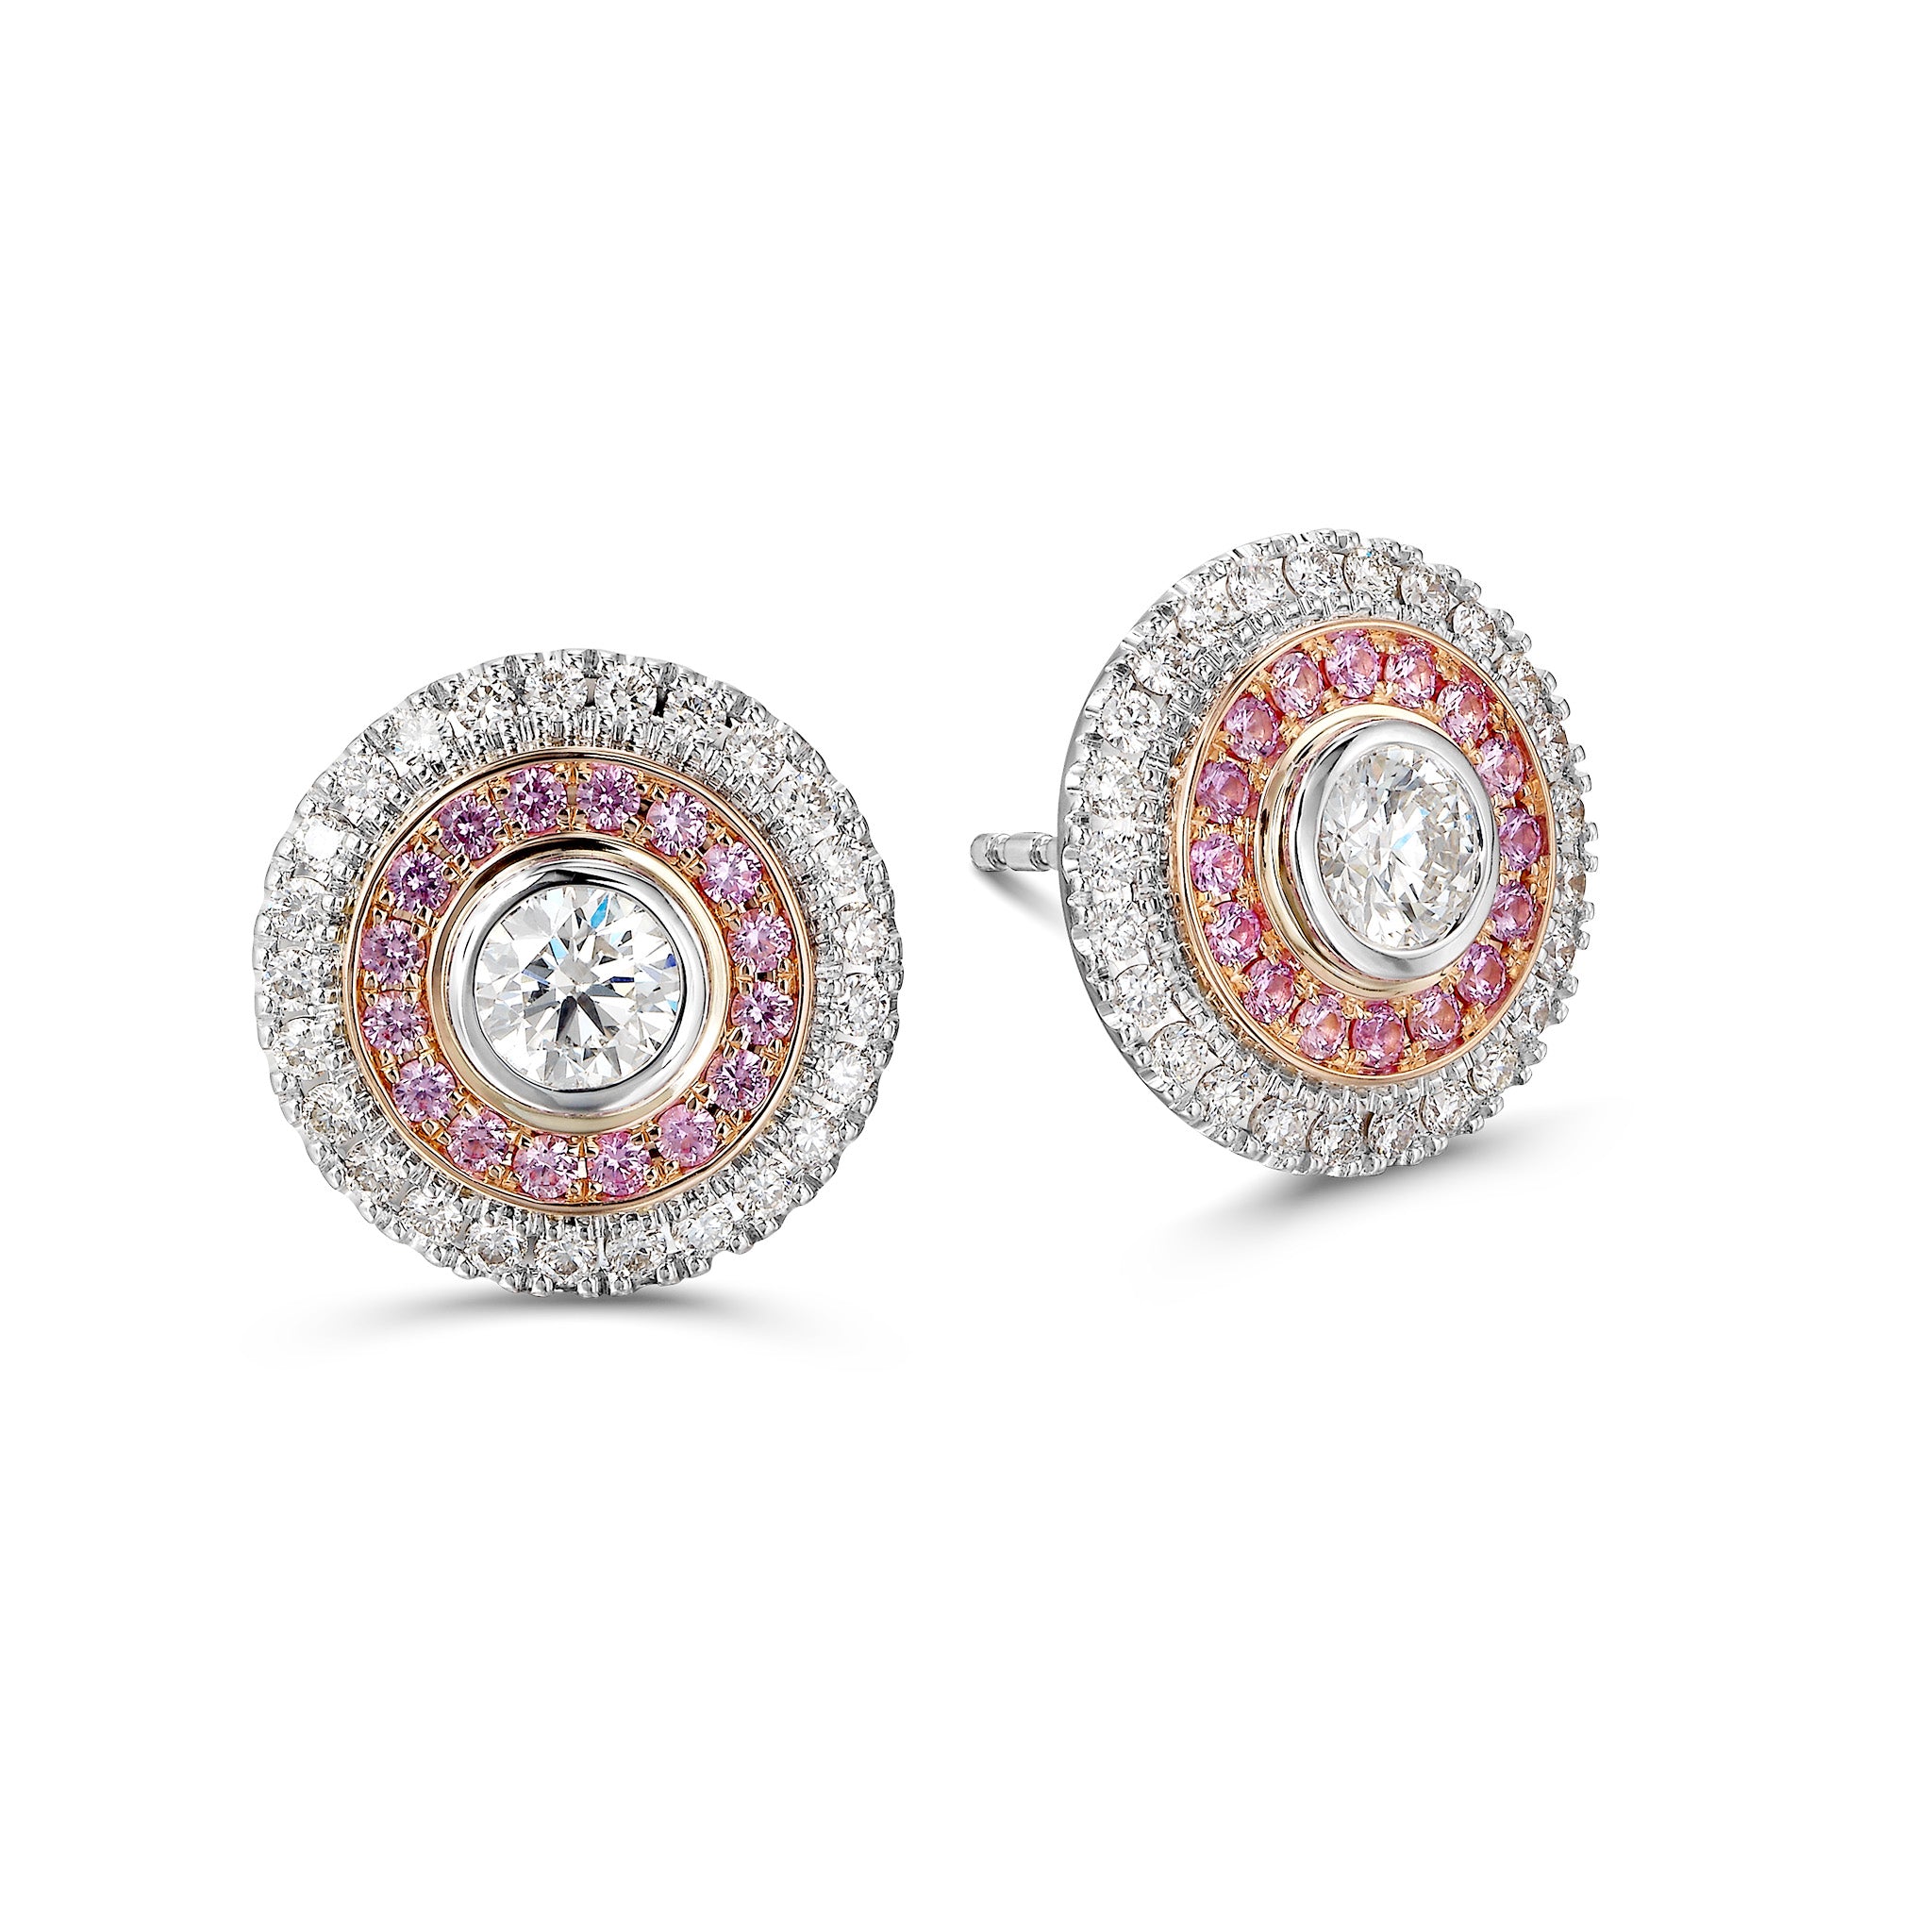 Shimansky - Diamond and Sapphire Double Microset Halo Earrings crafted in 18K White & Rose Gold